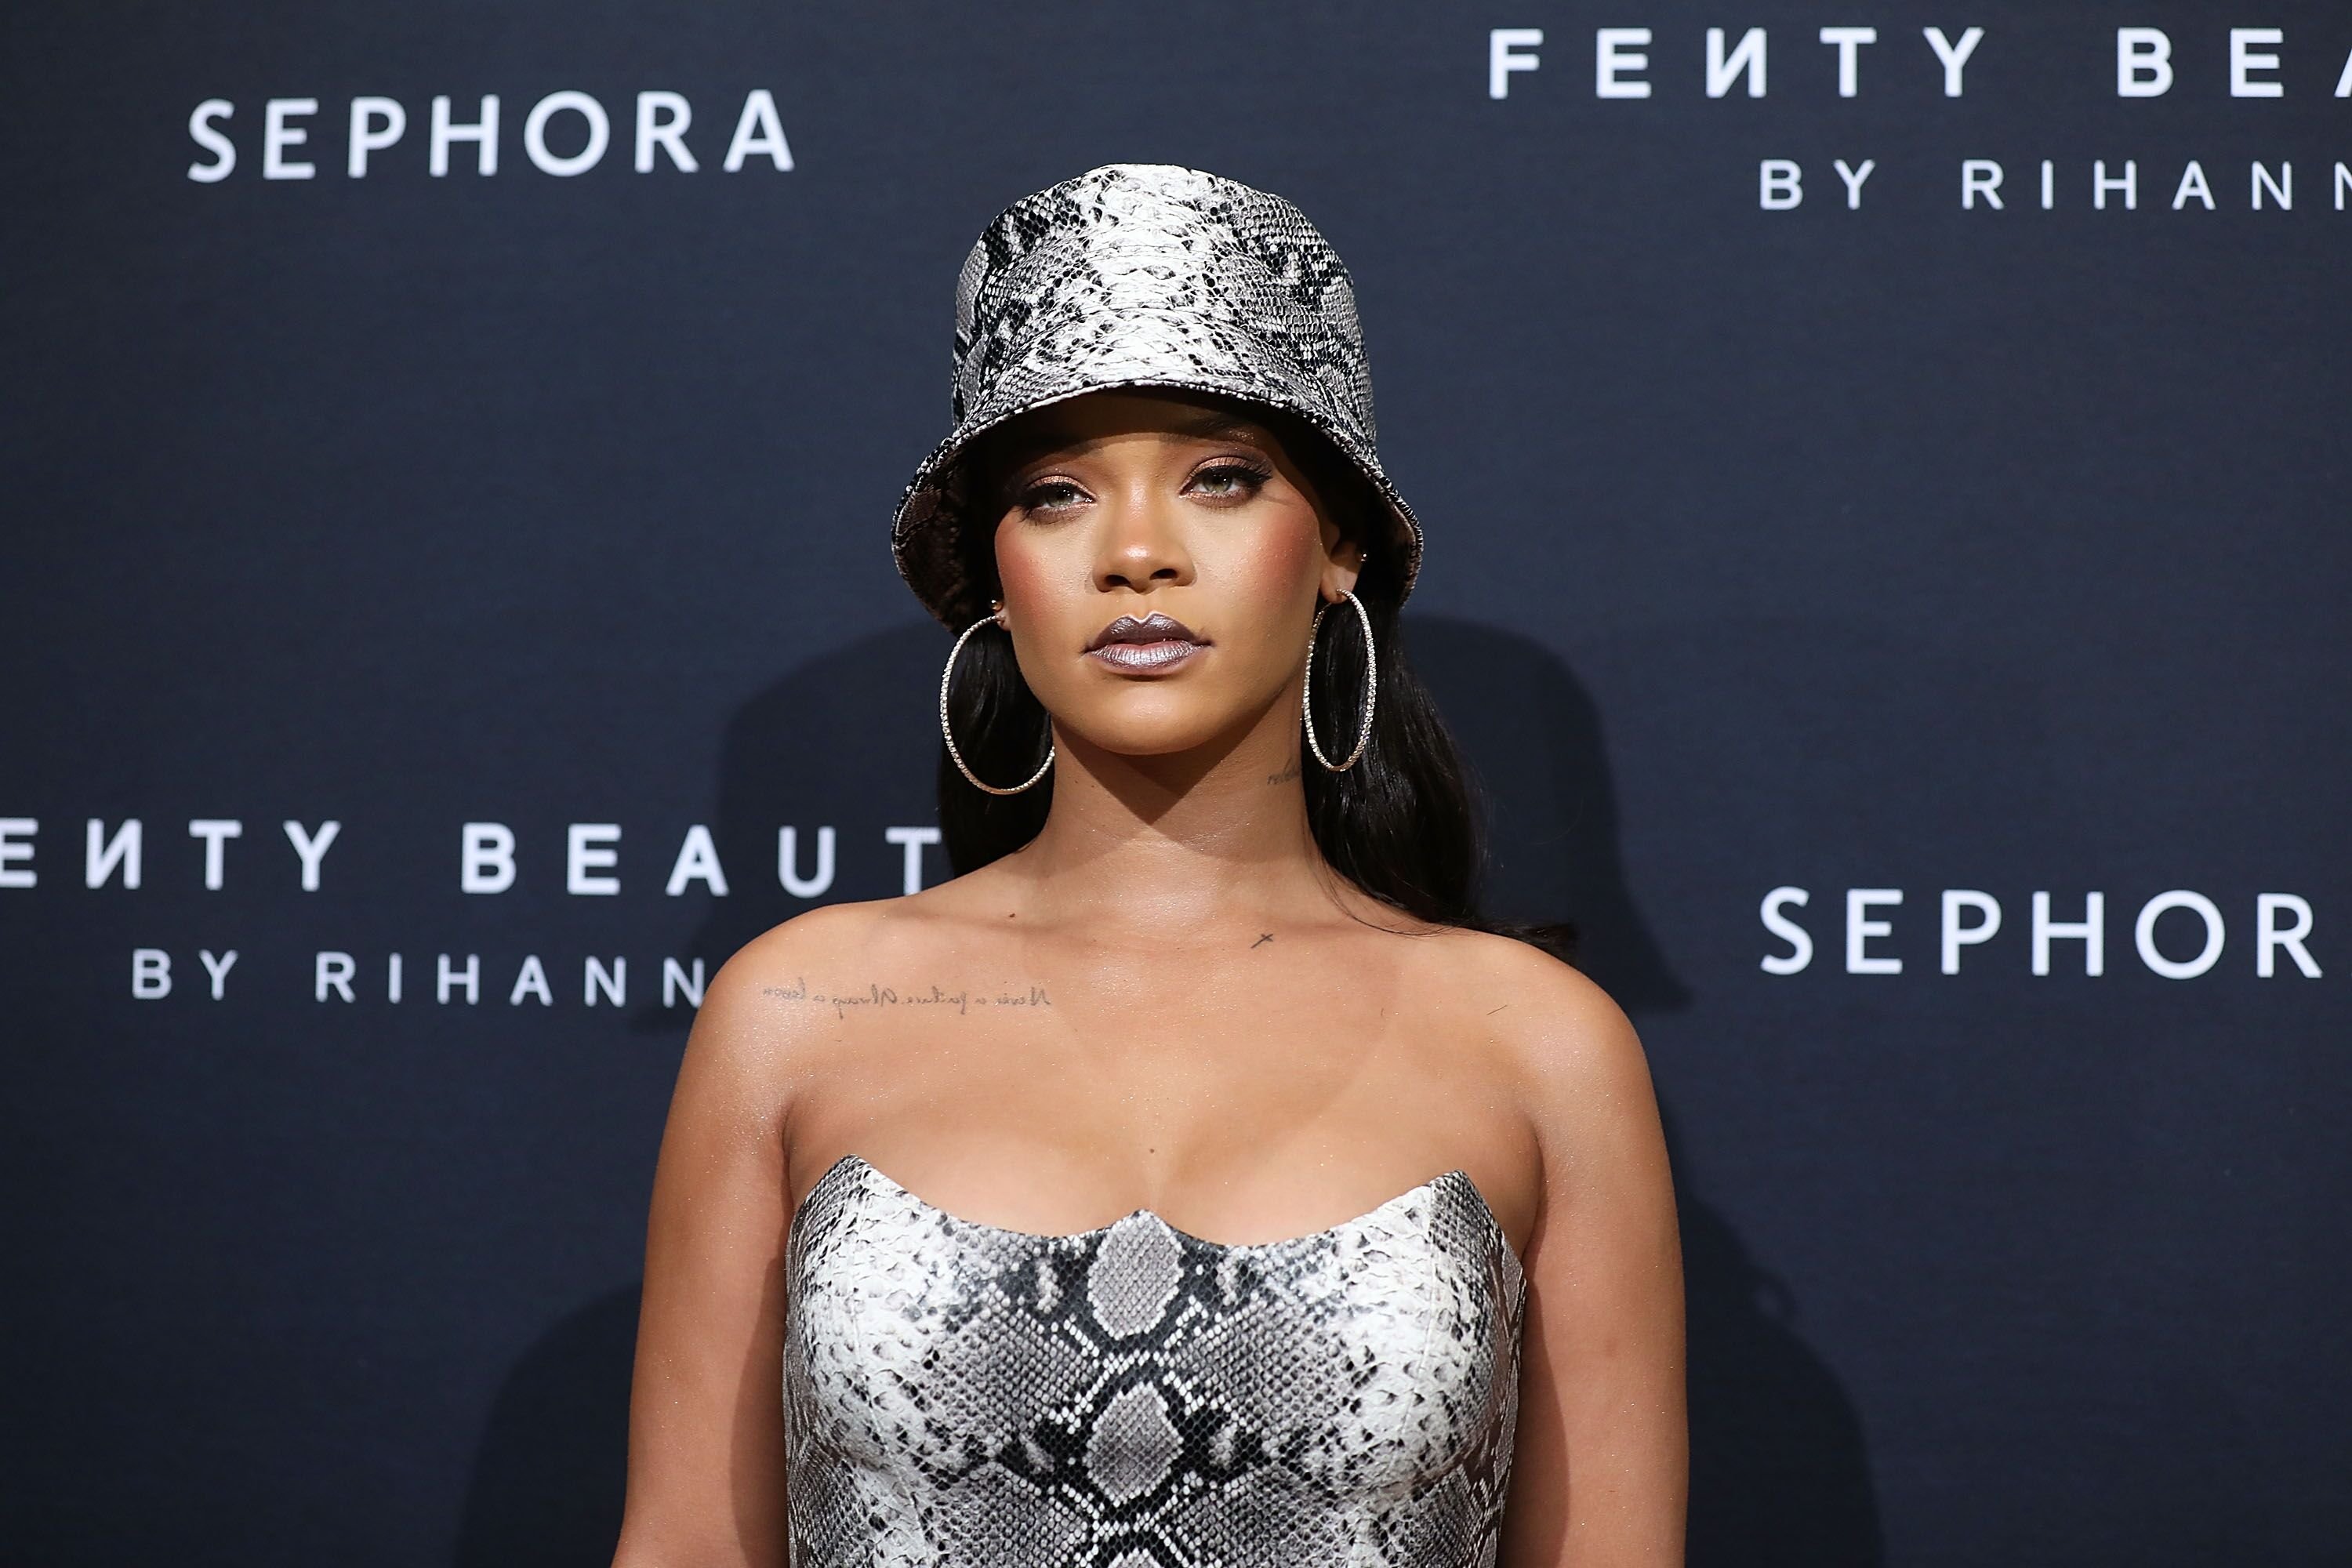  Rihanna at the Fenty Beauty by Rihanna Anniversary Event on October 3, 2018 in Sydney, Australia/ Source: Getty Images